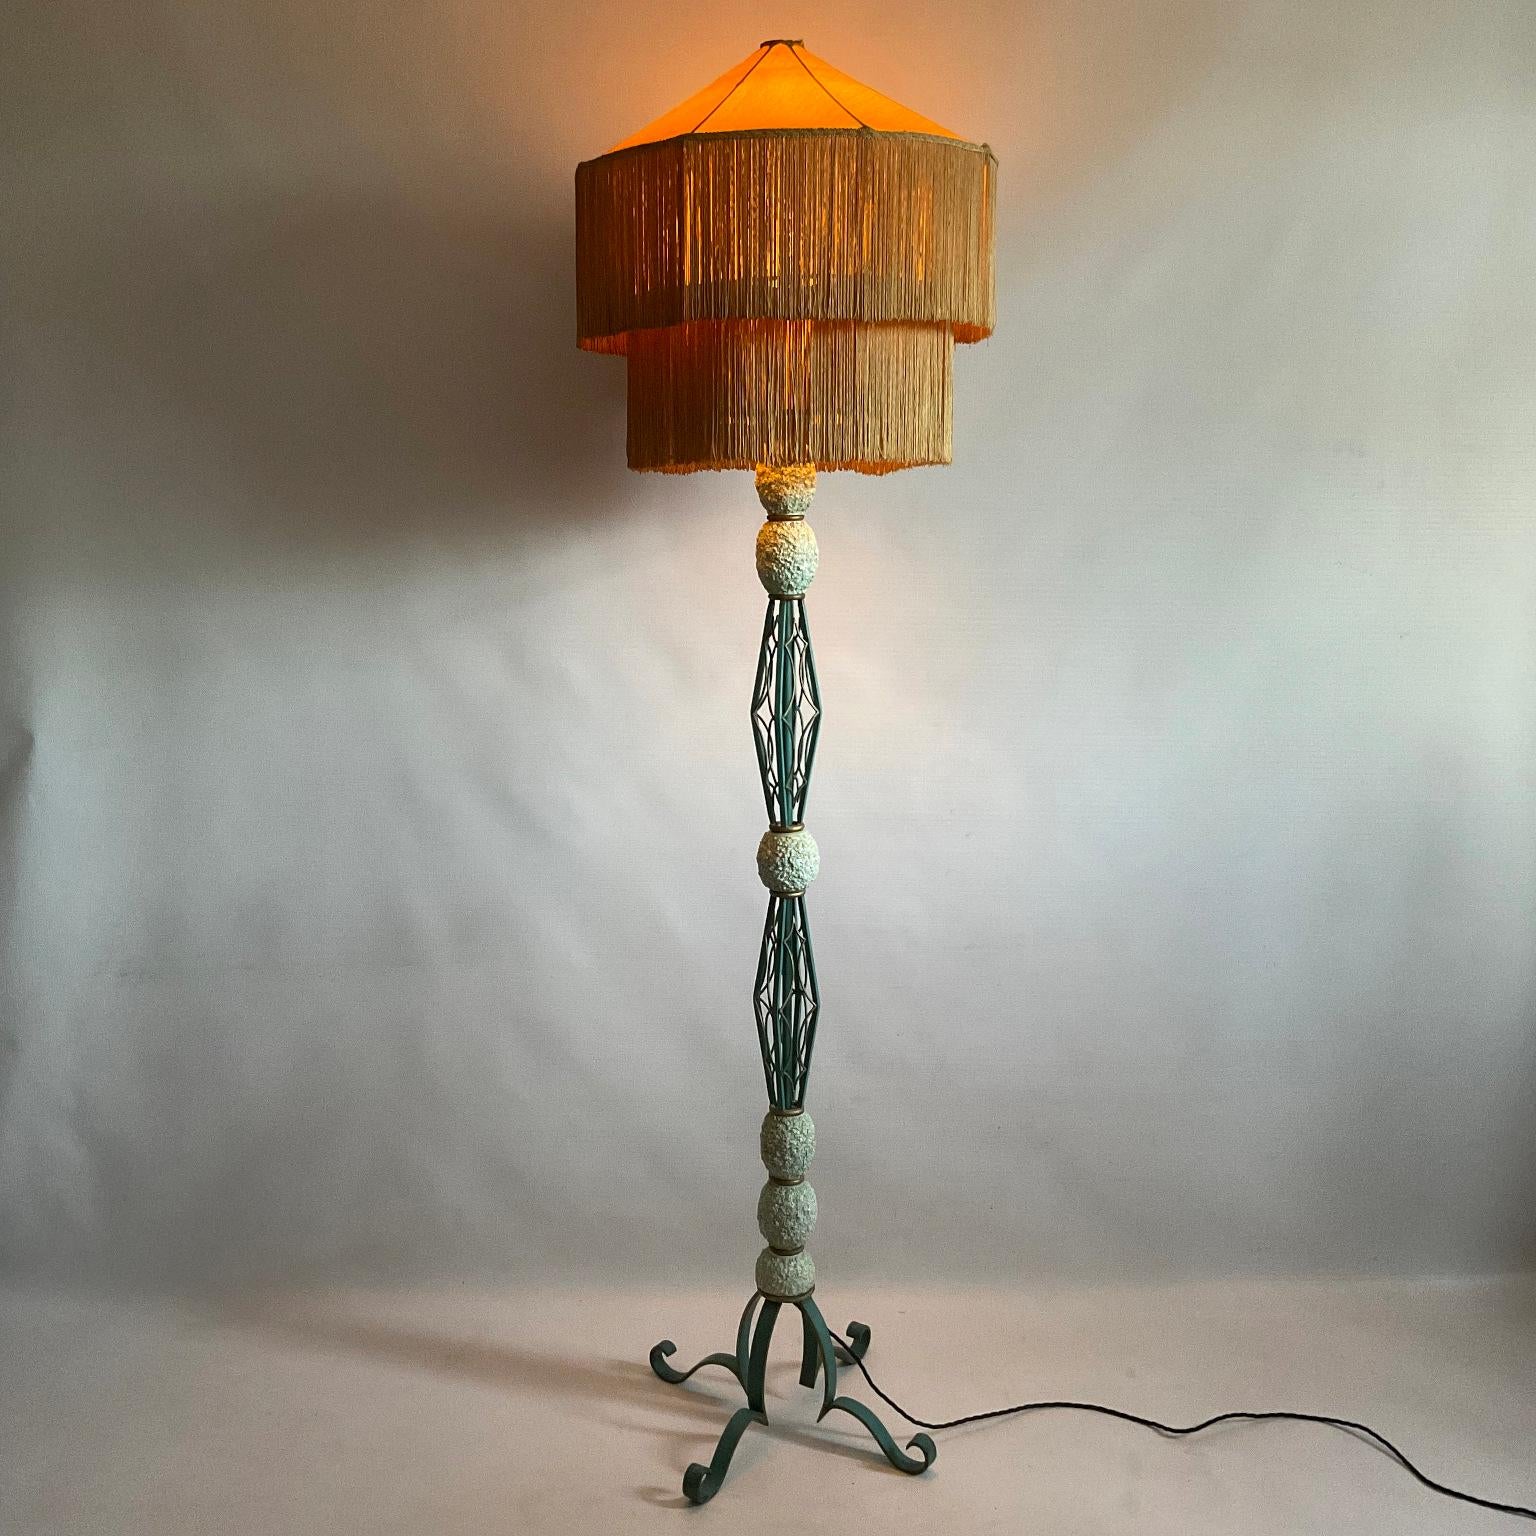 1940s French Wrought Iron Floor Lamp with Turquoise and Gold Enamel Finish  5